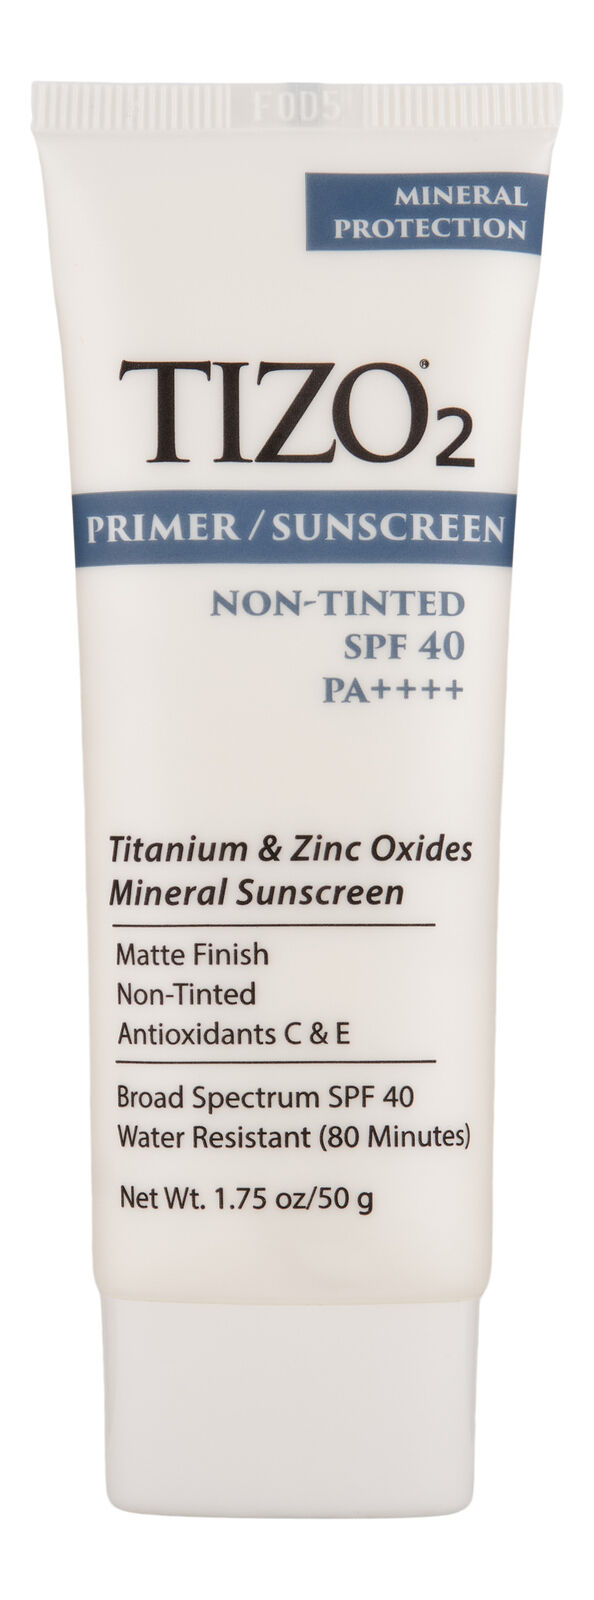 TIZO TIZO2 Facial Mineral Sunscreen safety It is very popular SPF 40.